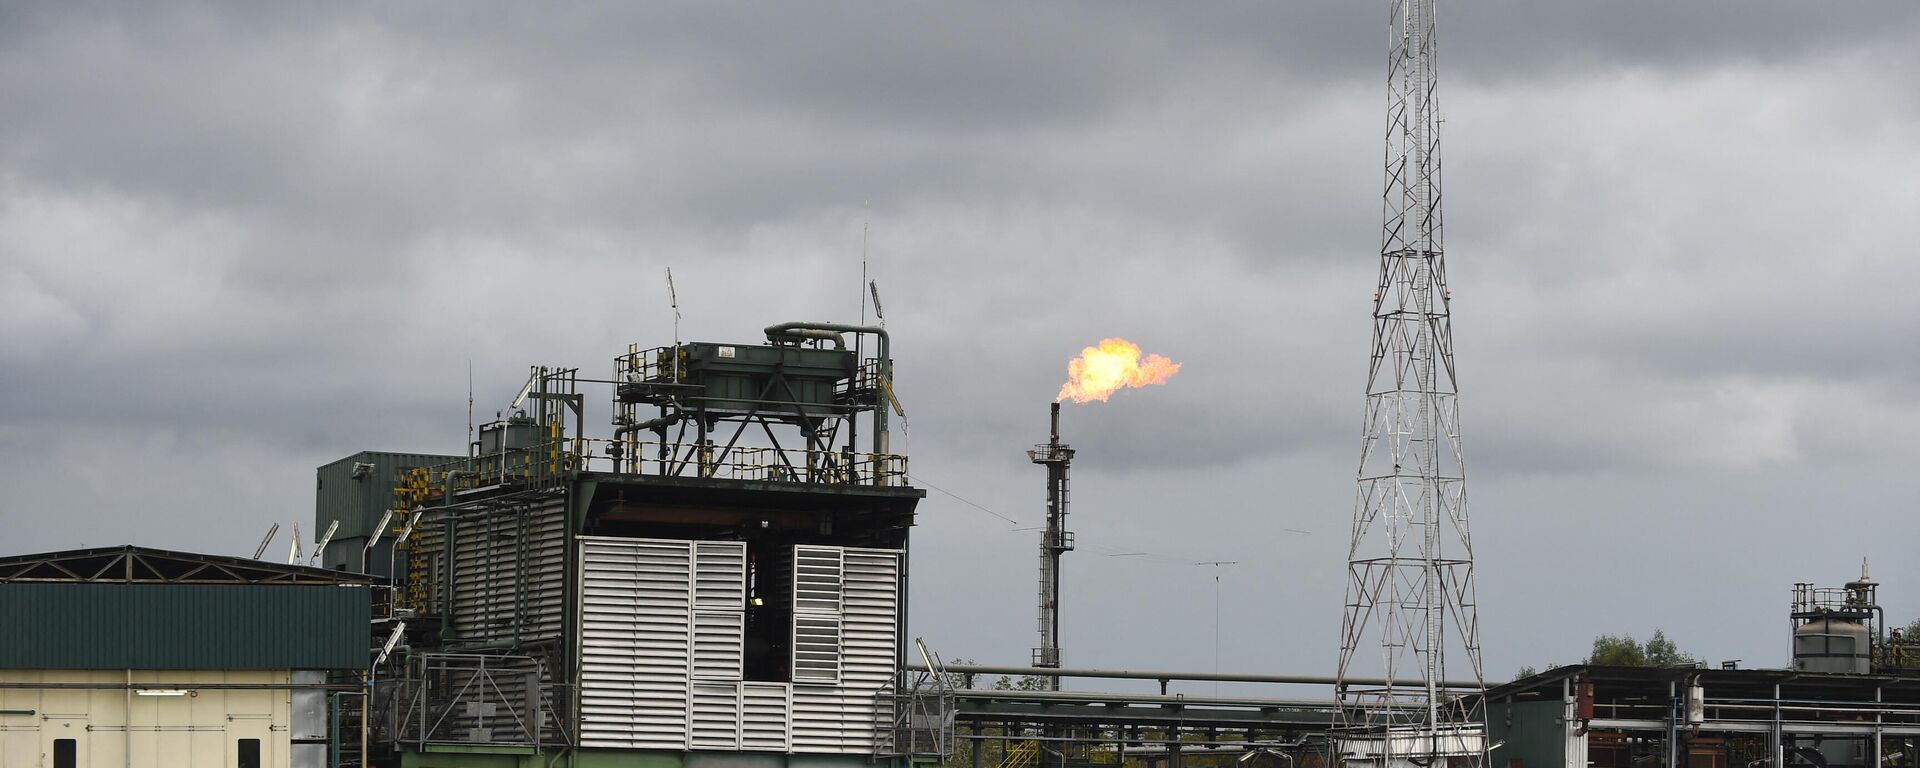 A gas flare burns at the Batan flow station operated by Chevron under a joint-venture arrangement with the Nigerian National Petroleum Corporation (NNPC) for the onshore and offshore assets in the Niger Delta region on March 26, 2018. - Sputnik International, 1920, 17.11.2022